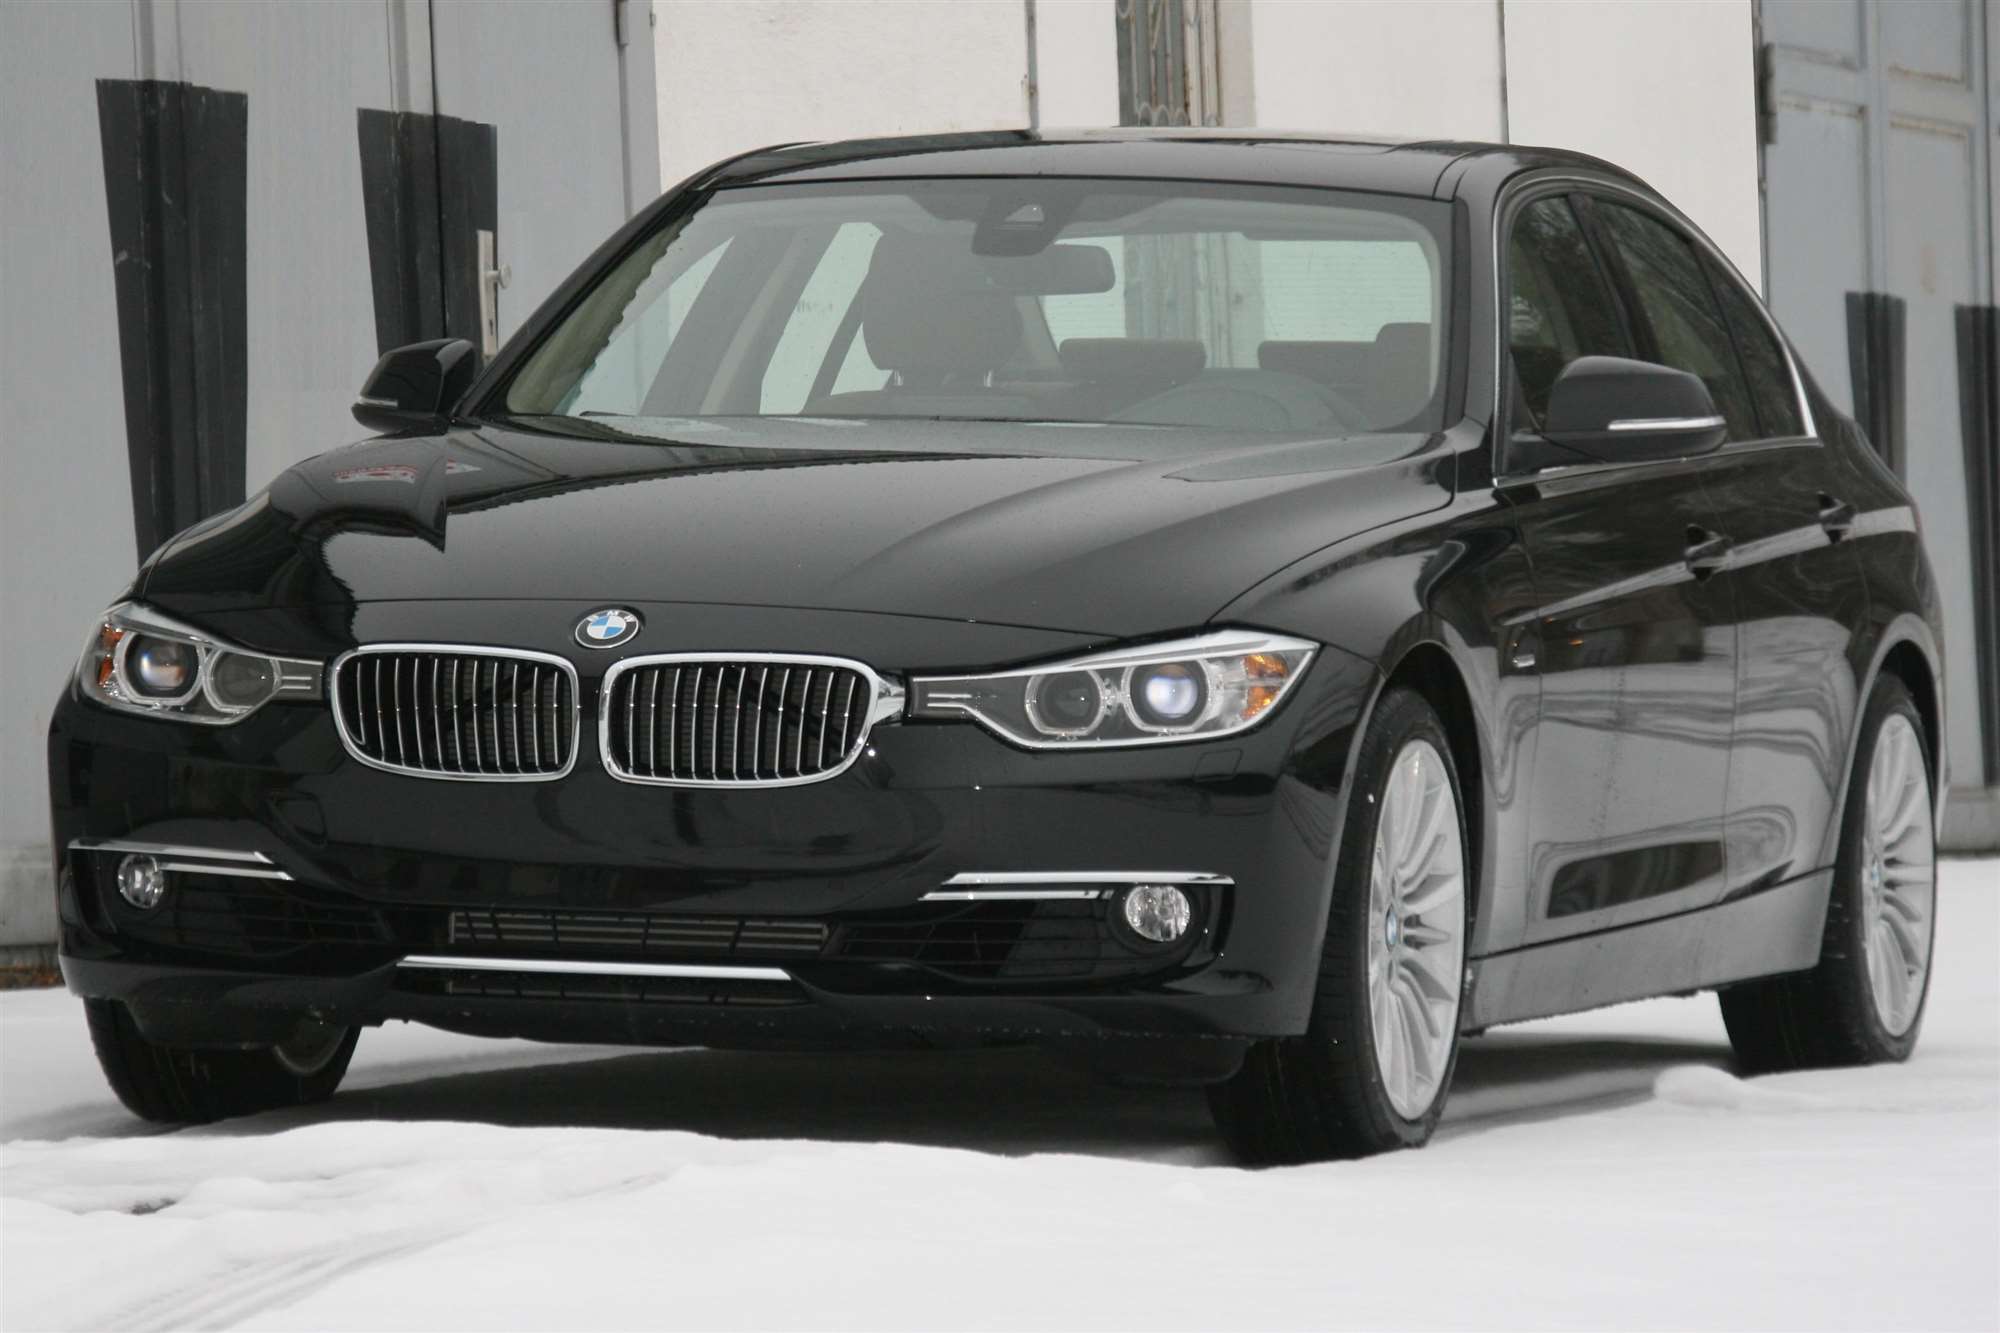 Bmw security flaw which cars #2